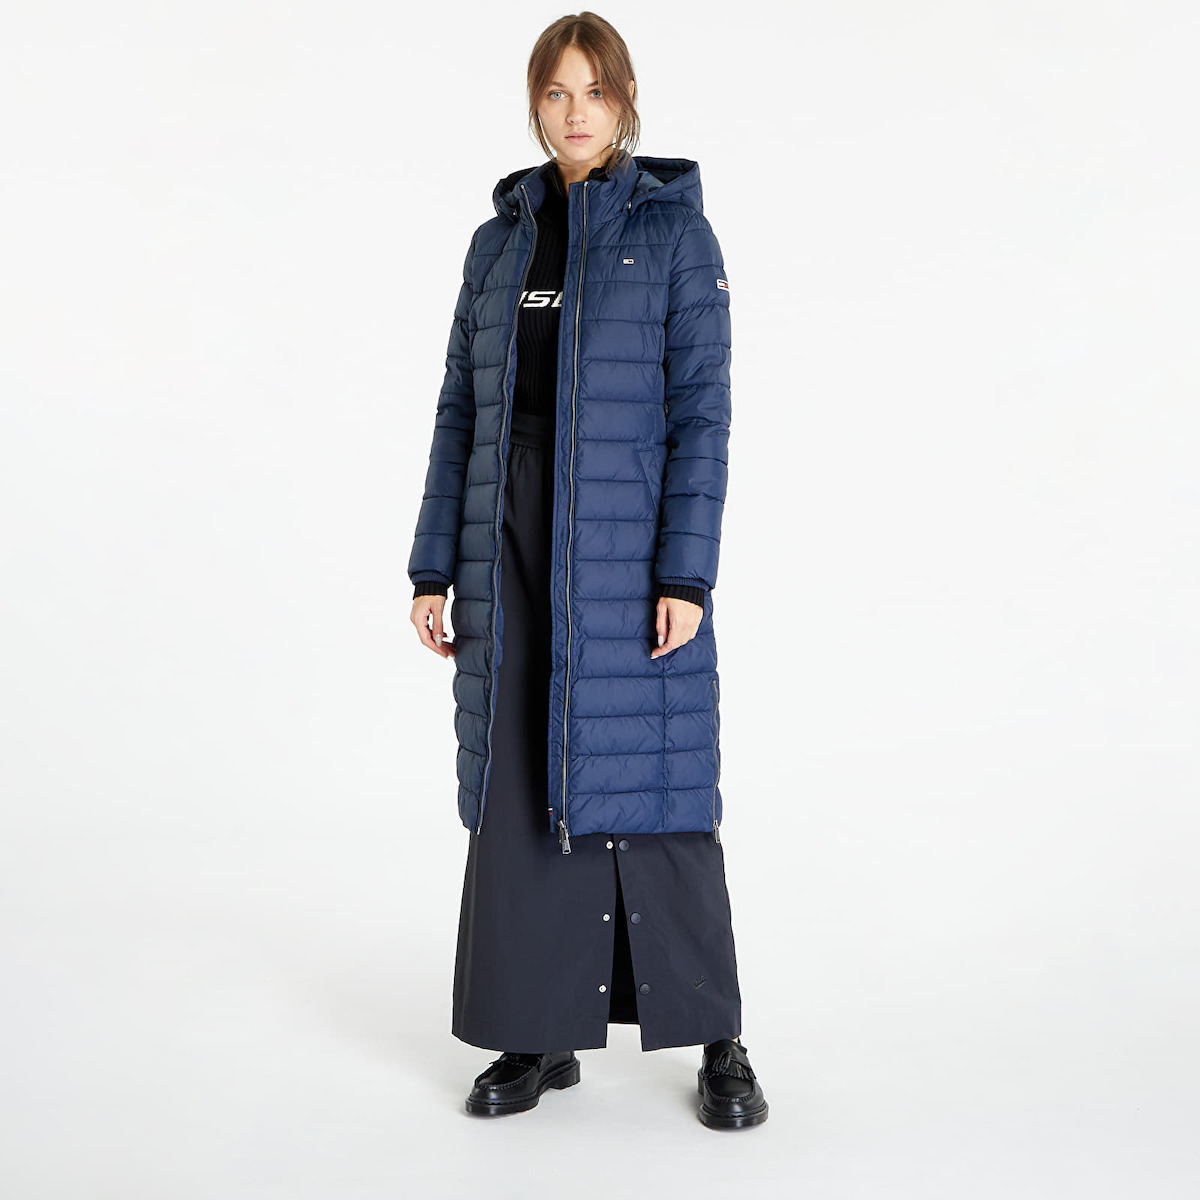 Tommy Hilfiger Women's Long Puffer Jacket for Spring or Autumn with Hood  Navy Blue DW0DW14385C87